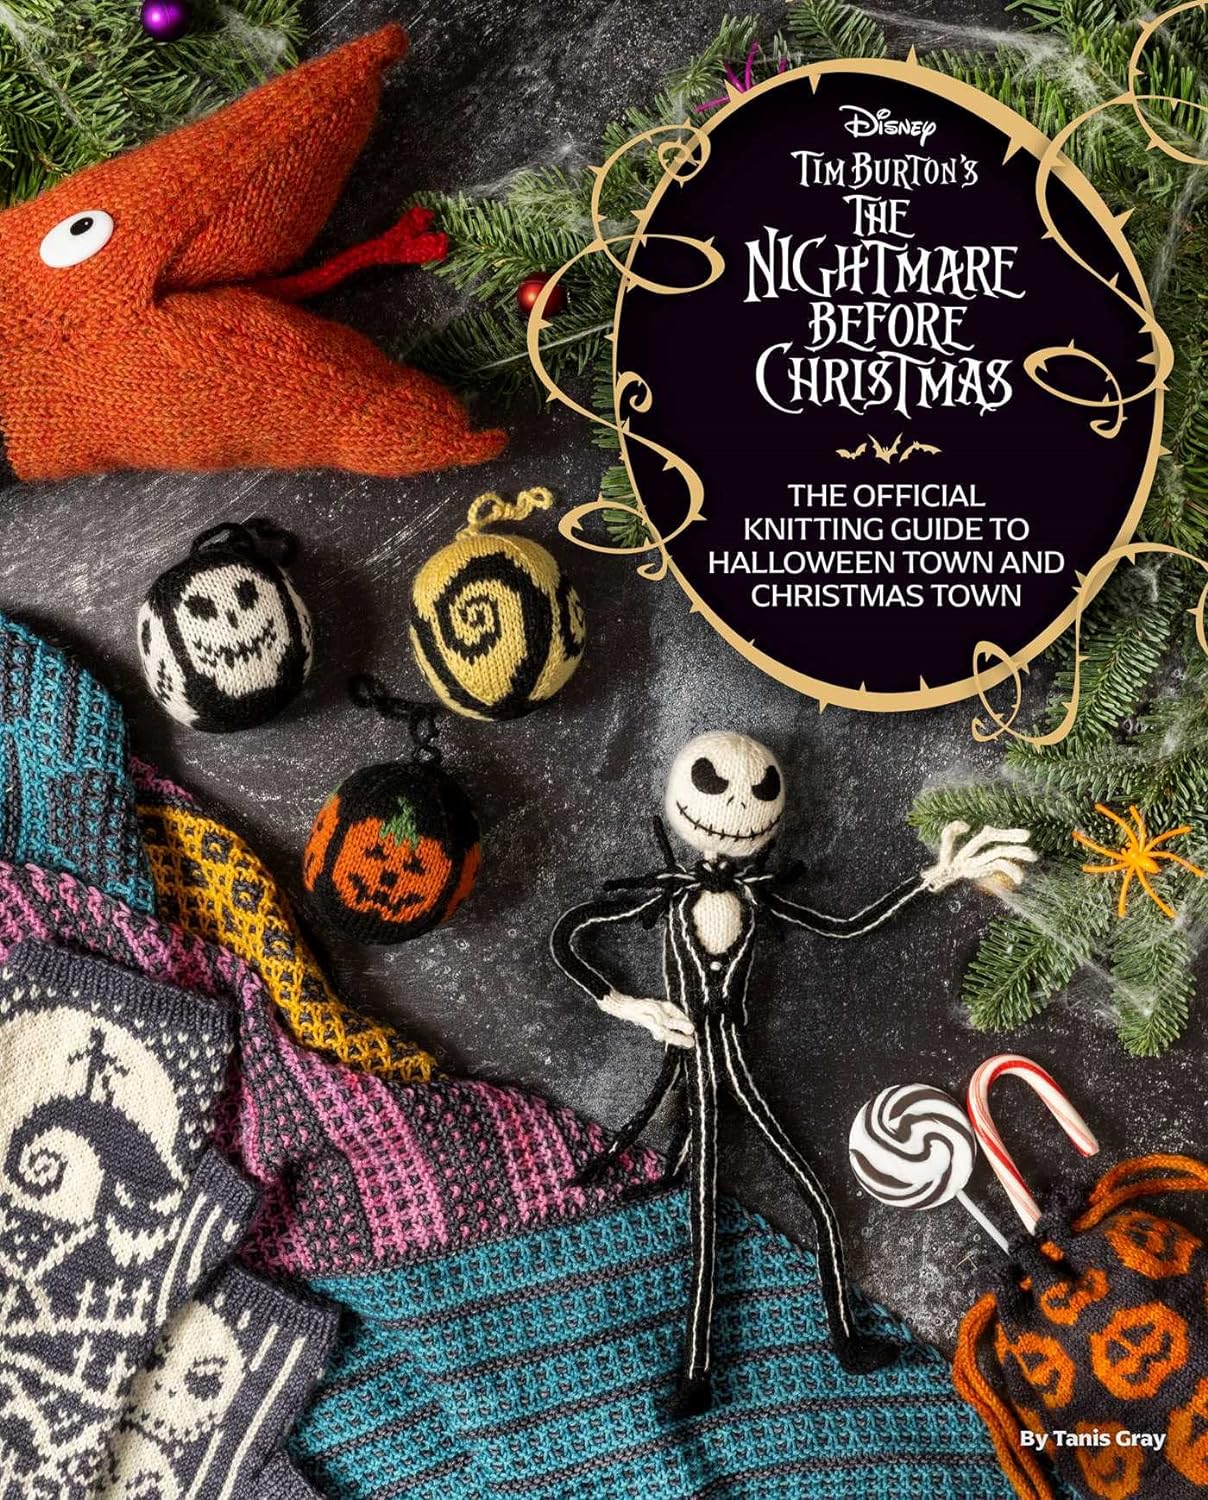 Load image into Gallery viewer, An image of a book cover. On the top right corner of the cover is a black oval, with white text saying &amp;quot;Tim Burton&amp;#39;s The Nightmare before chrsitmas: the official knitting guide to halloween town and christmas town.&amp;quot; On the cover are various knitting projects depicting characters from the film The nightmare before christmas.
